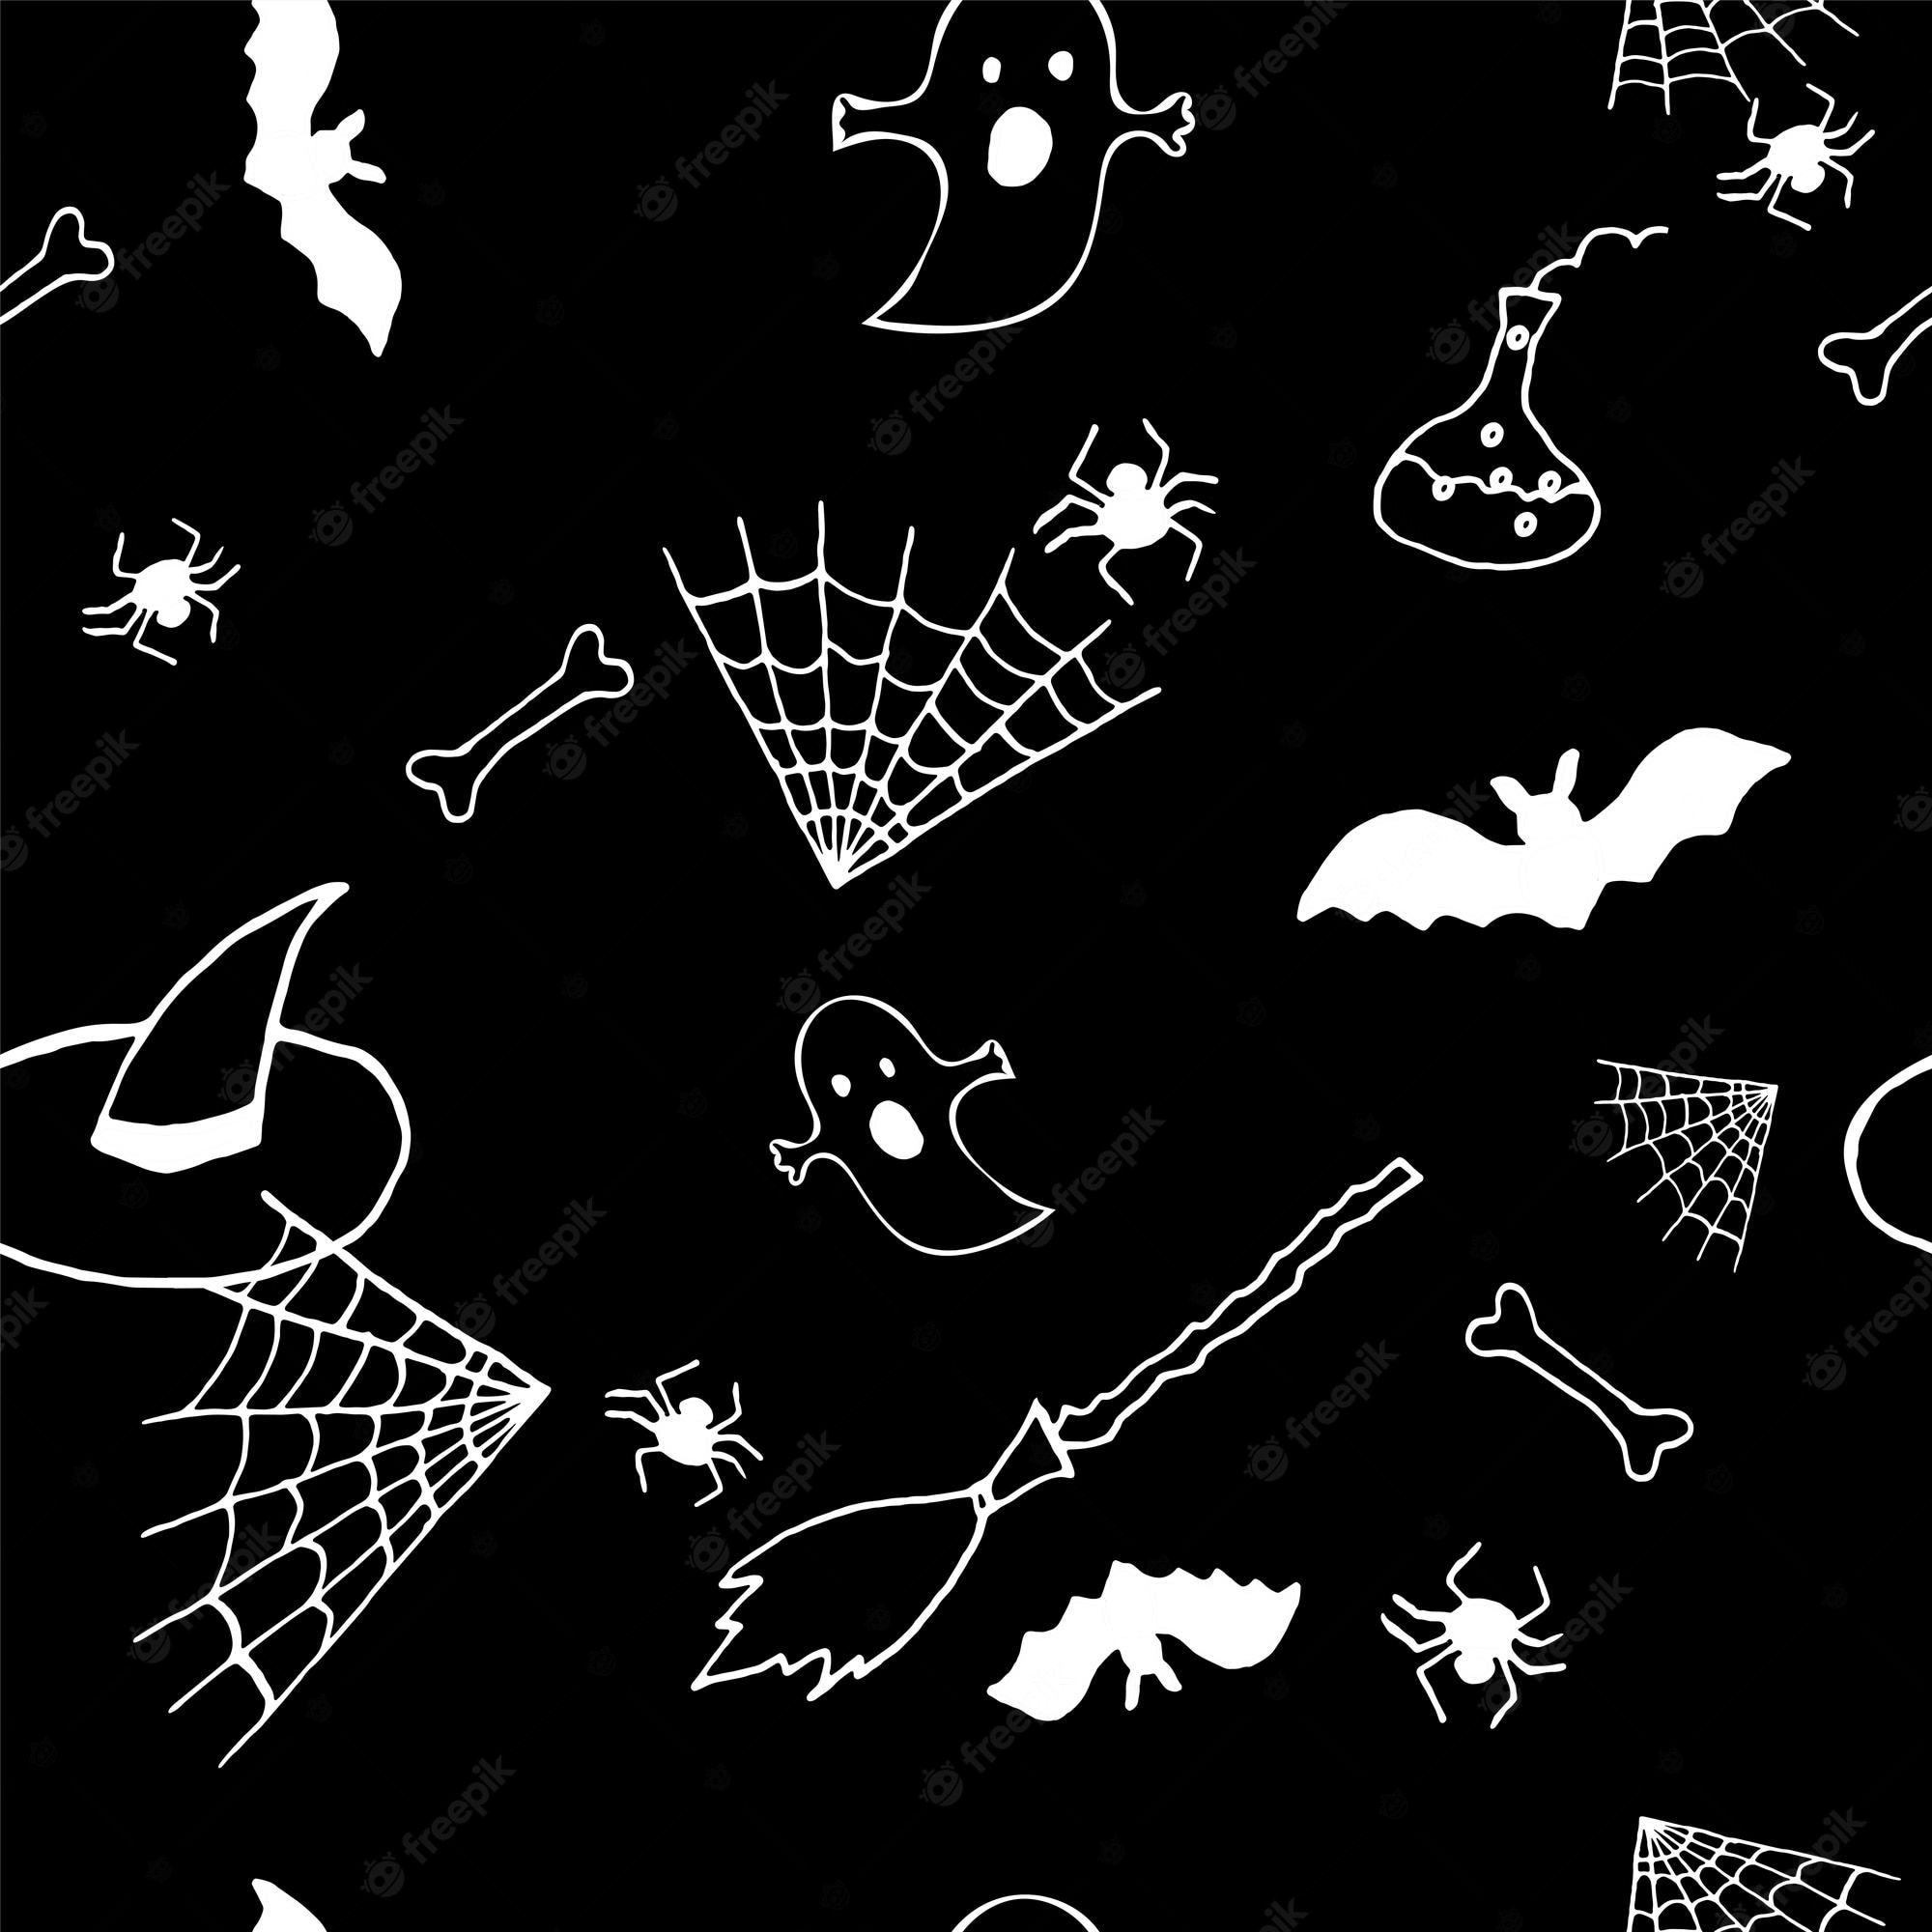 A black and white Halloween pattern with bats, ghosts, and spiders. - Witch